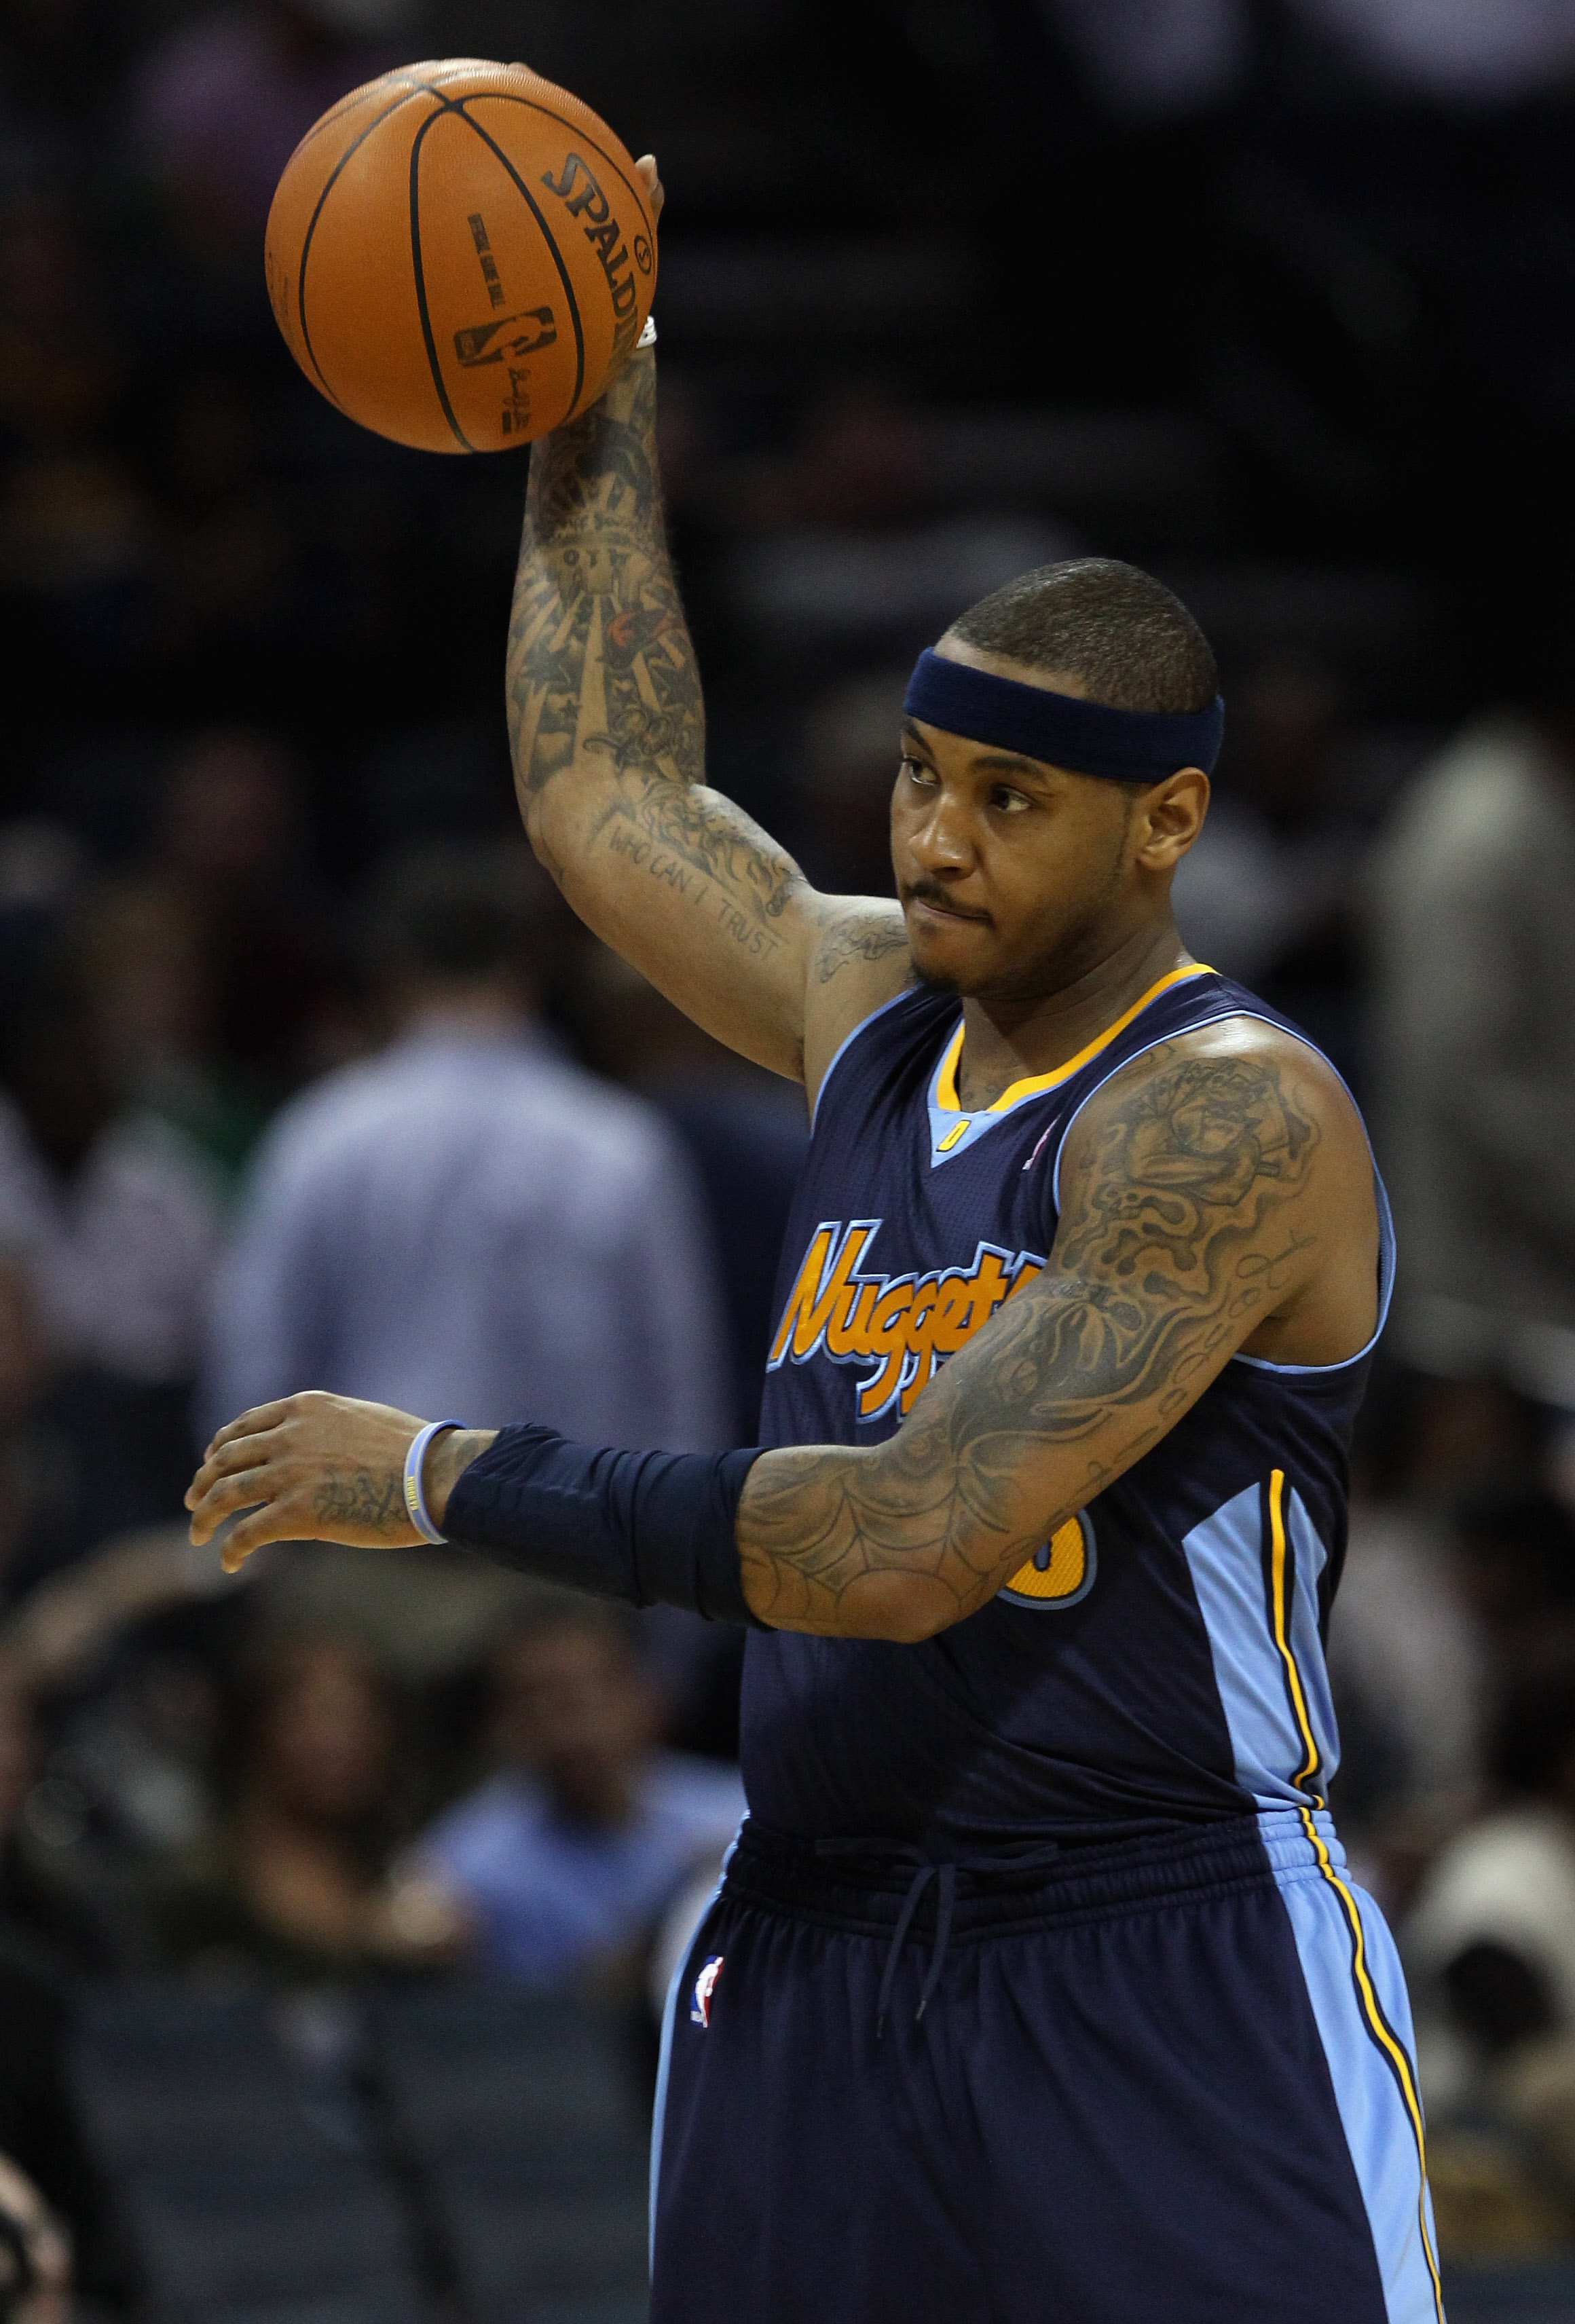 CHARLOTTE, NC - DECEMBER 07:  Carmelo Anthony #15 of the Denver Nuggets watches on against the Charlotte Bobcats during their game at Time Warner Cable Arena on December 7, 2010 in Charlotte, North Carolina.  NOTE TO USER: User expressly acknowledges and